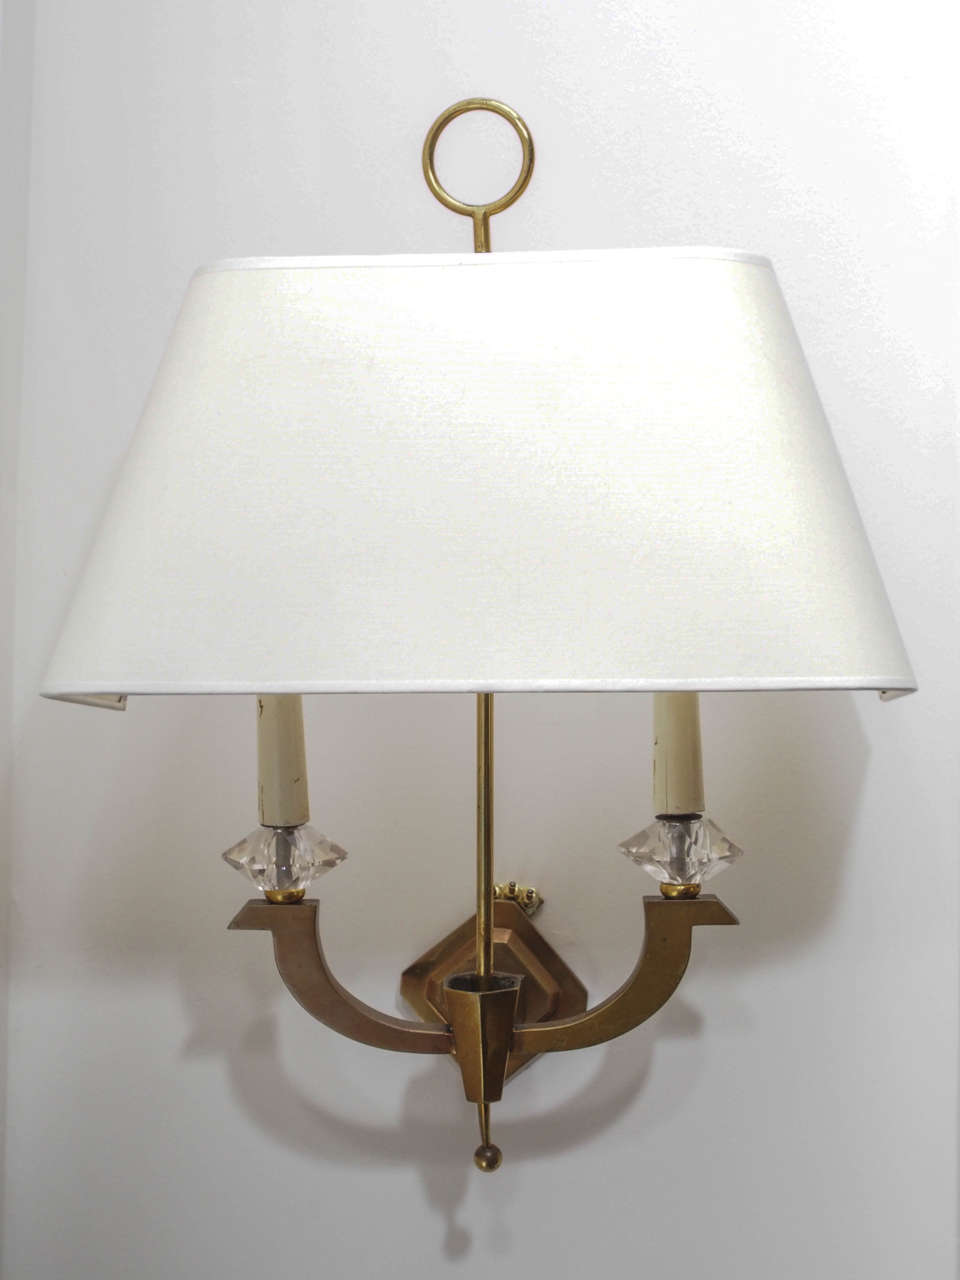 Single two-light sconce in gilt bronze; wooden tapers with faceted glass at the bases; half-shade in ivory silk.